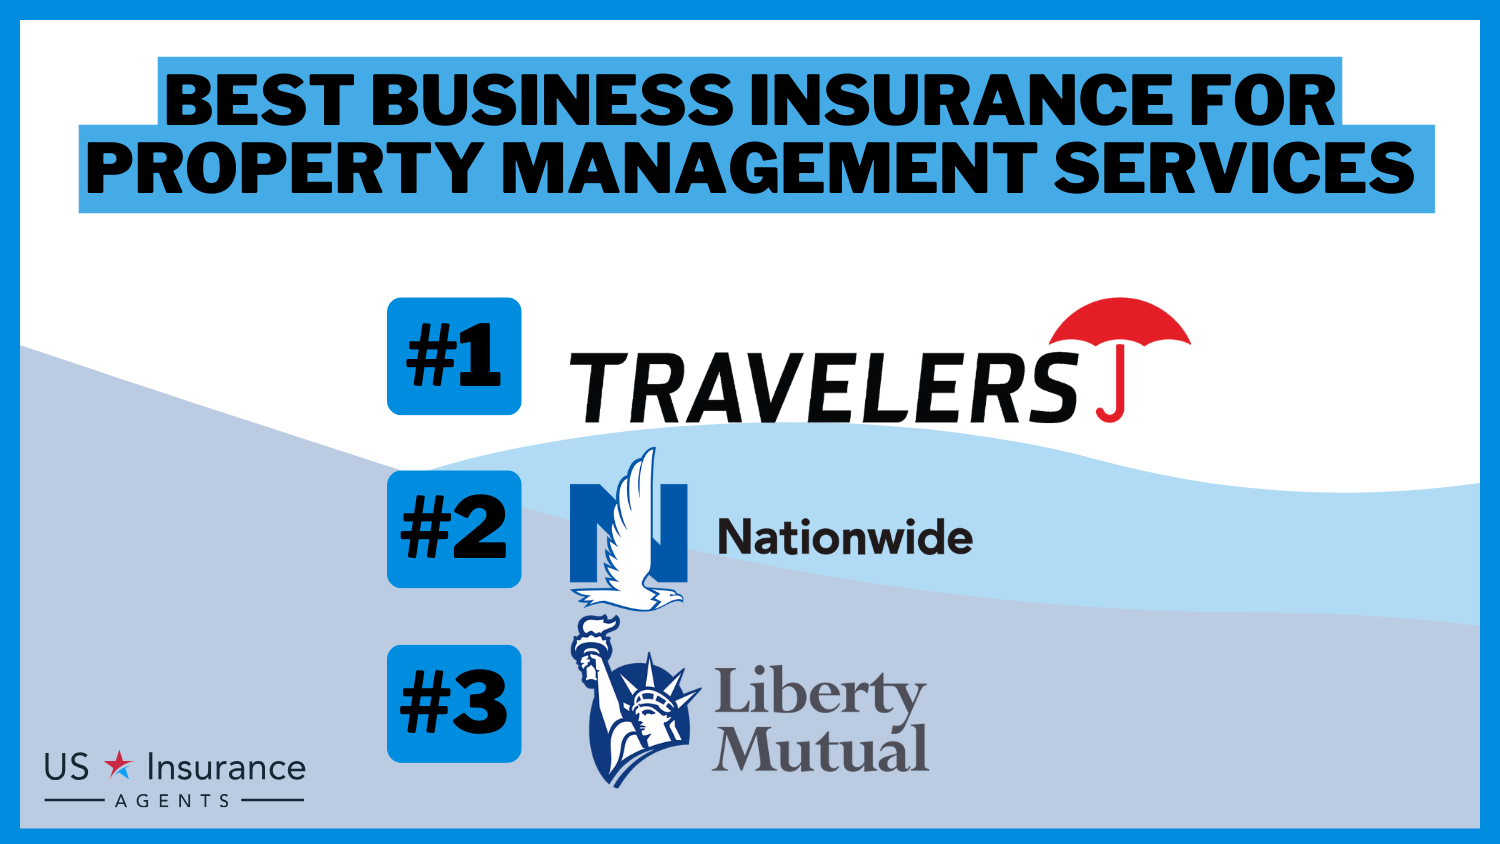 Travelers, Nationwide, Liberty Mutual: Best Business Insurance for Property Management Services